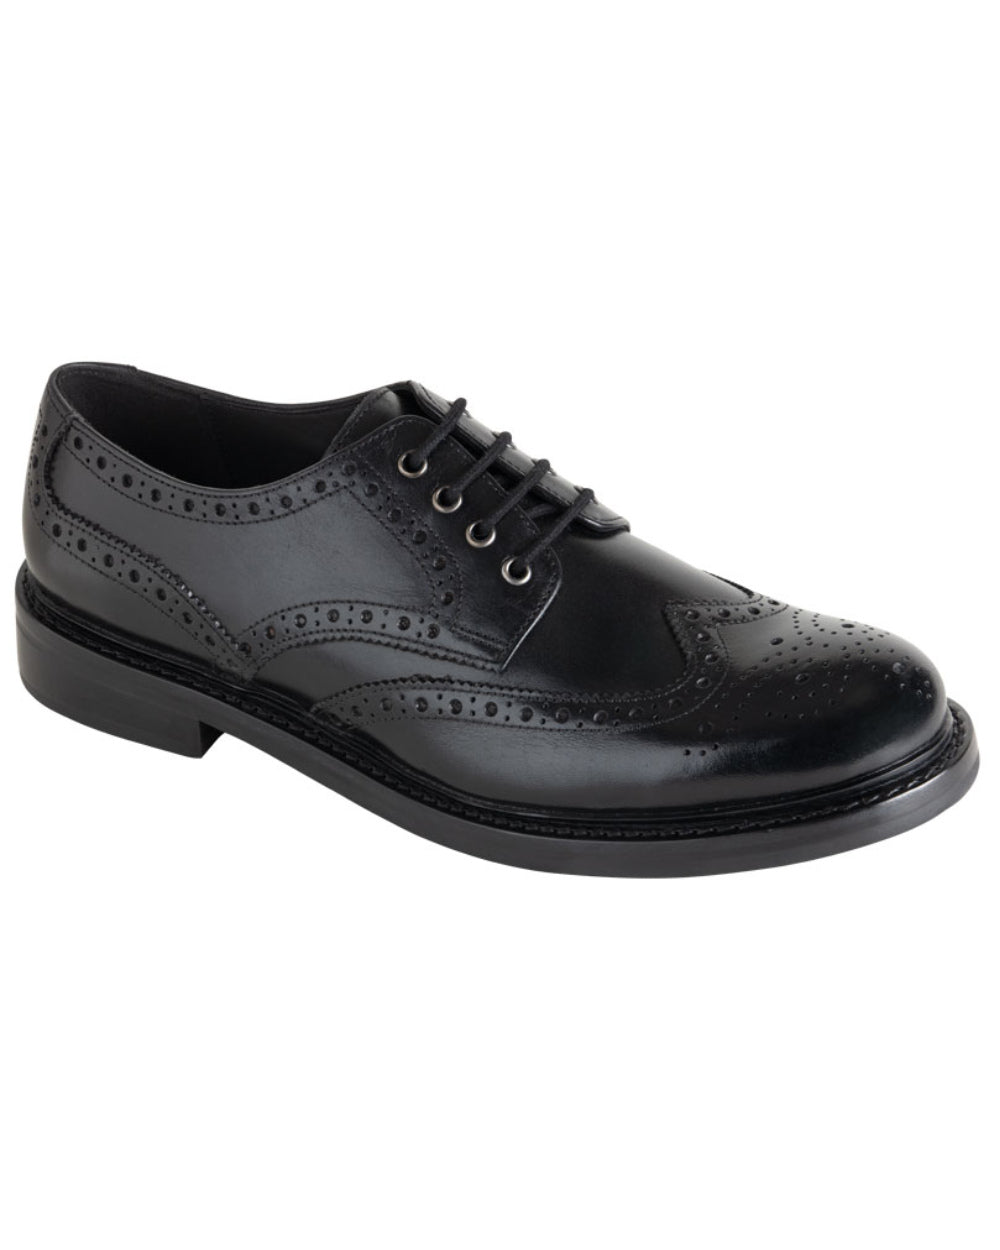 Black Coloured Hoggs of Fife Muirfield All Leather Brogue Shoe On A White Background 